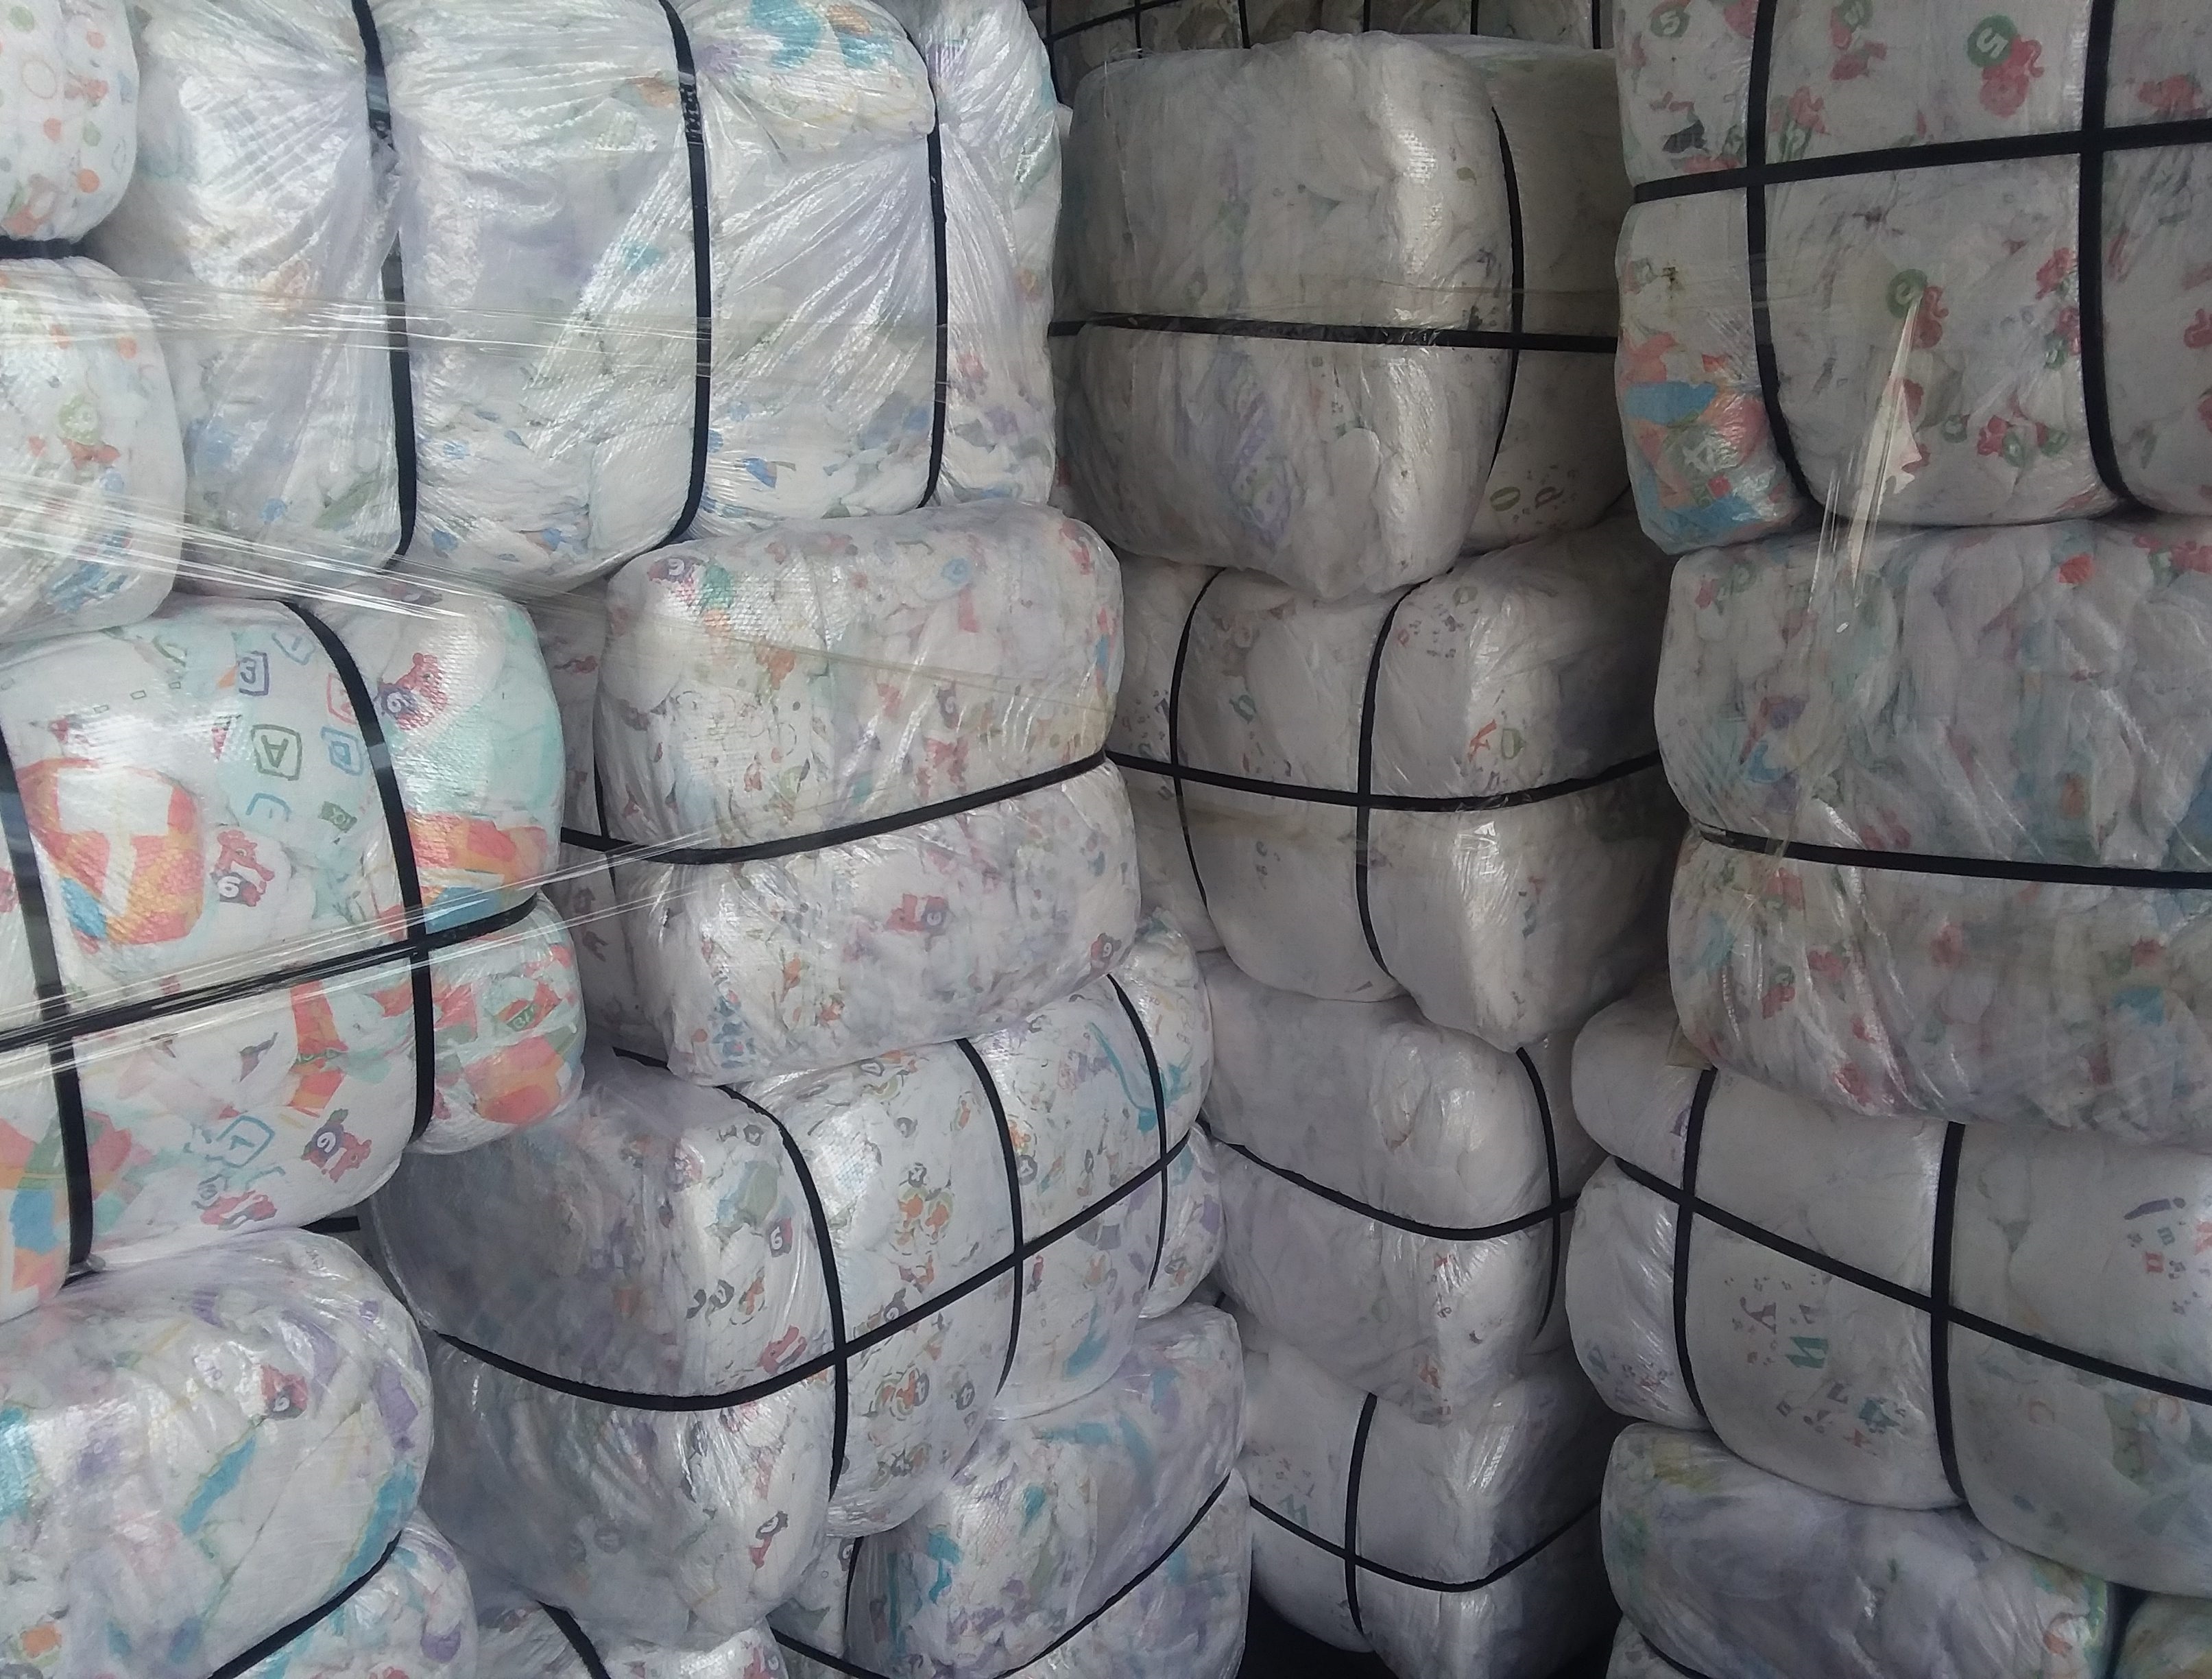 Baby diapers in bales